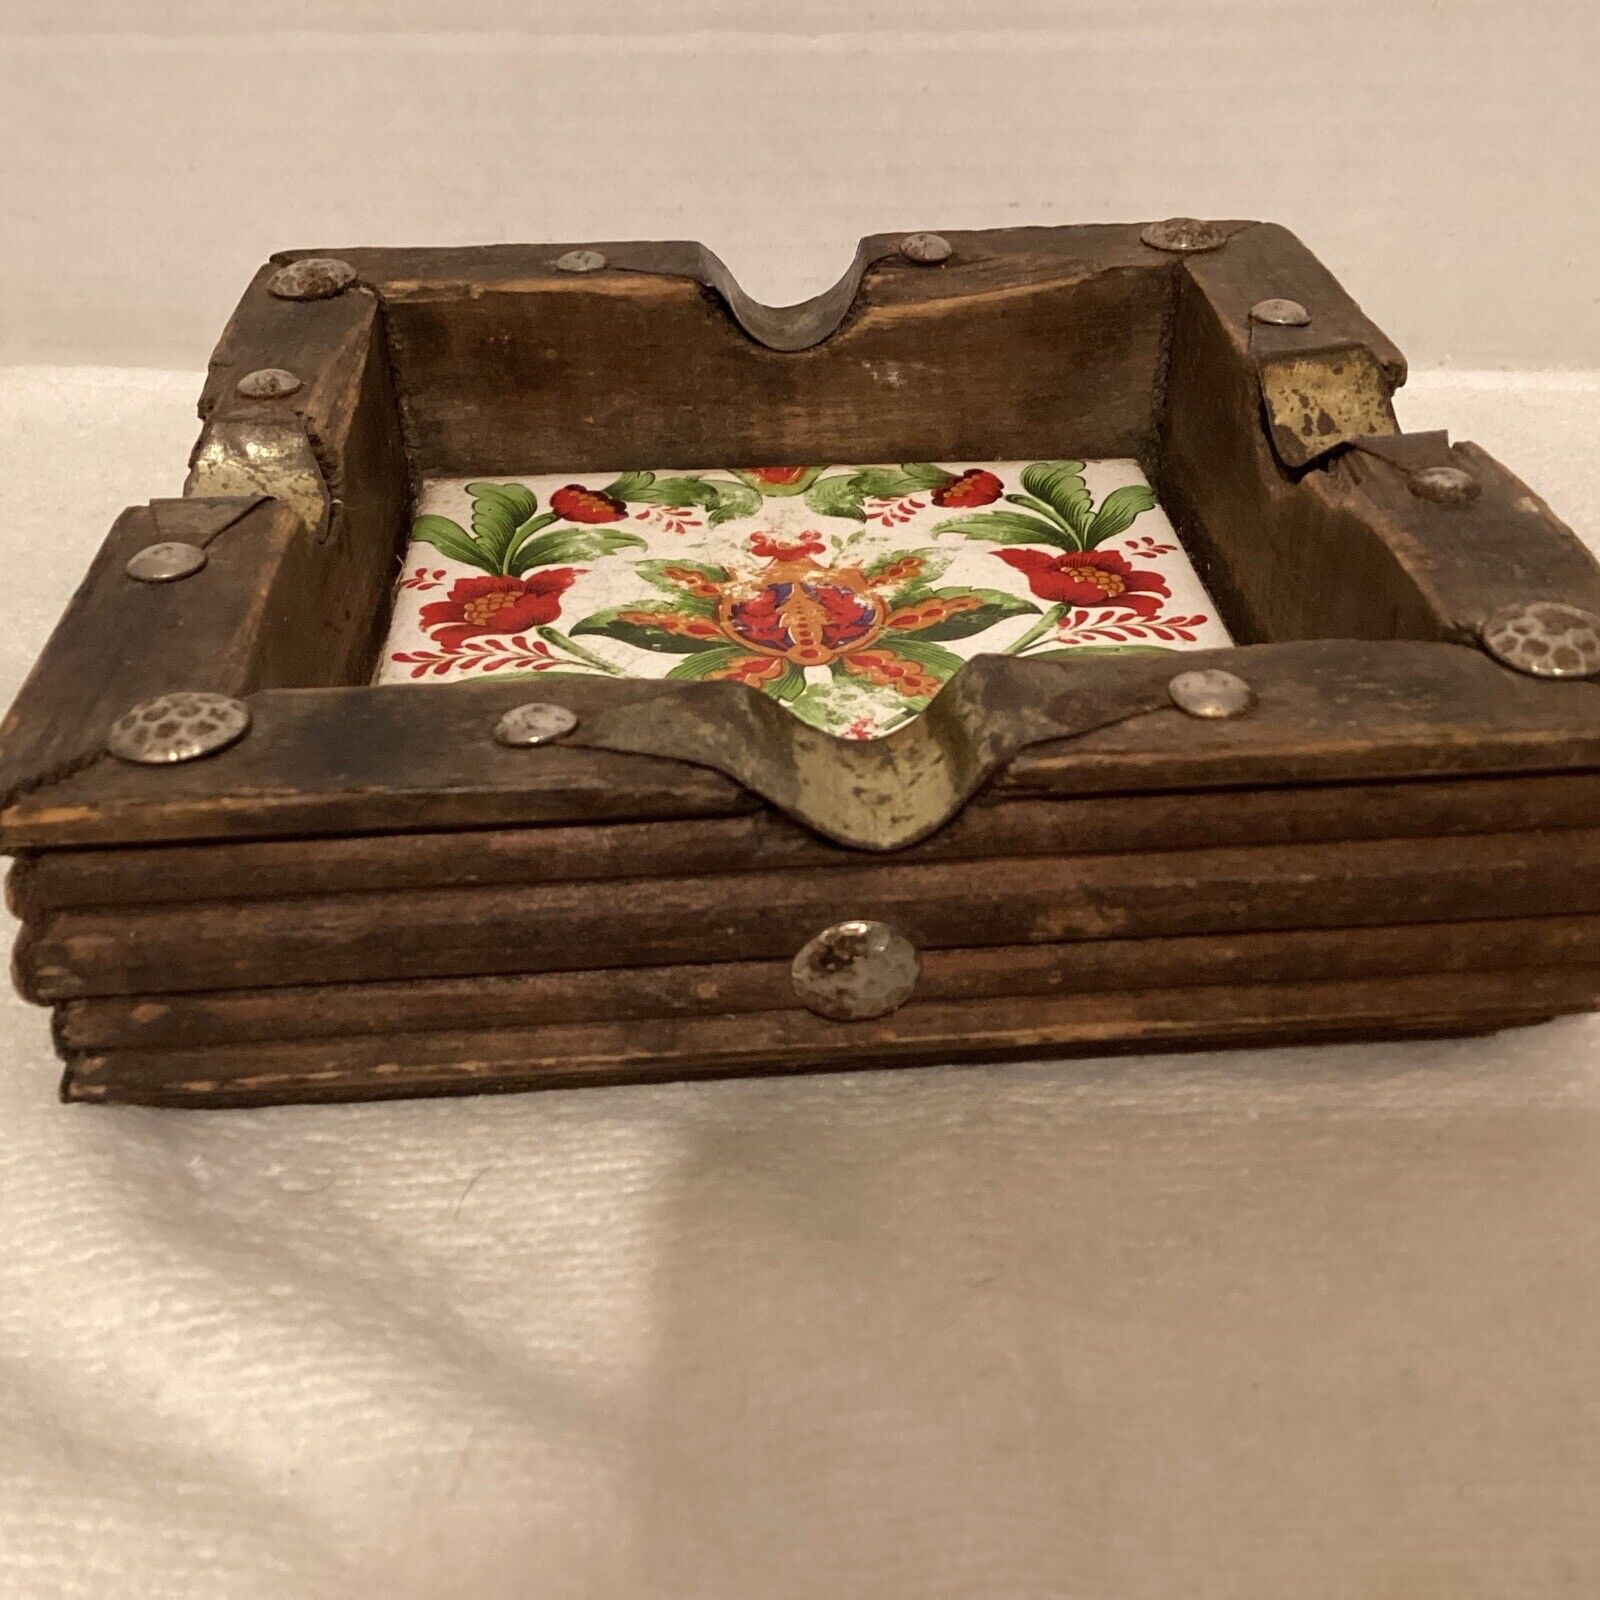 Vintage Southwest Floral Toile Tile Wooden Tramp Style Ashtray Brass Tact.